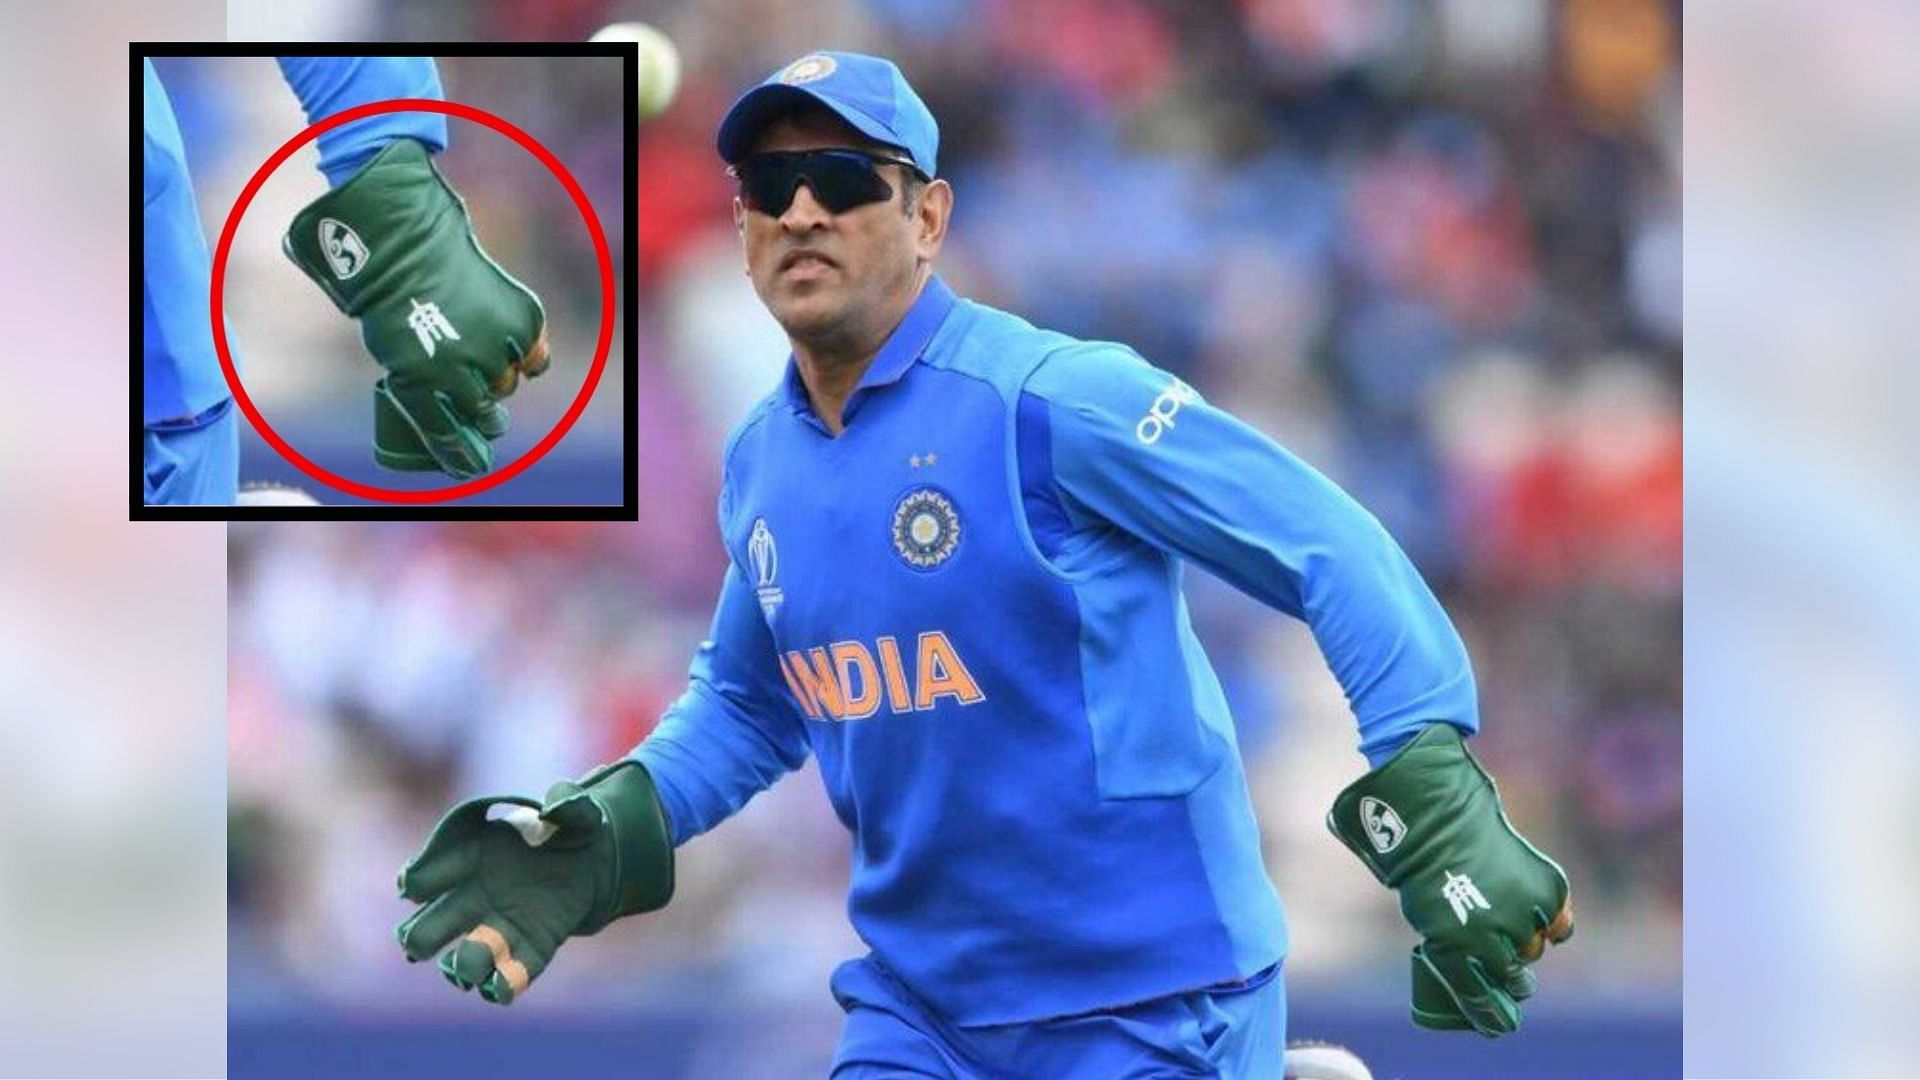 MS Dhoni Pays Tribute to Indian Army: Twitter erupted after they pointed out a special symbol embroidered on MS Dhoni’s gloves.